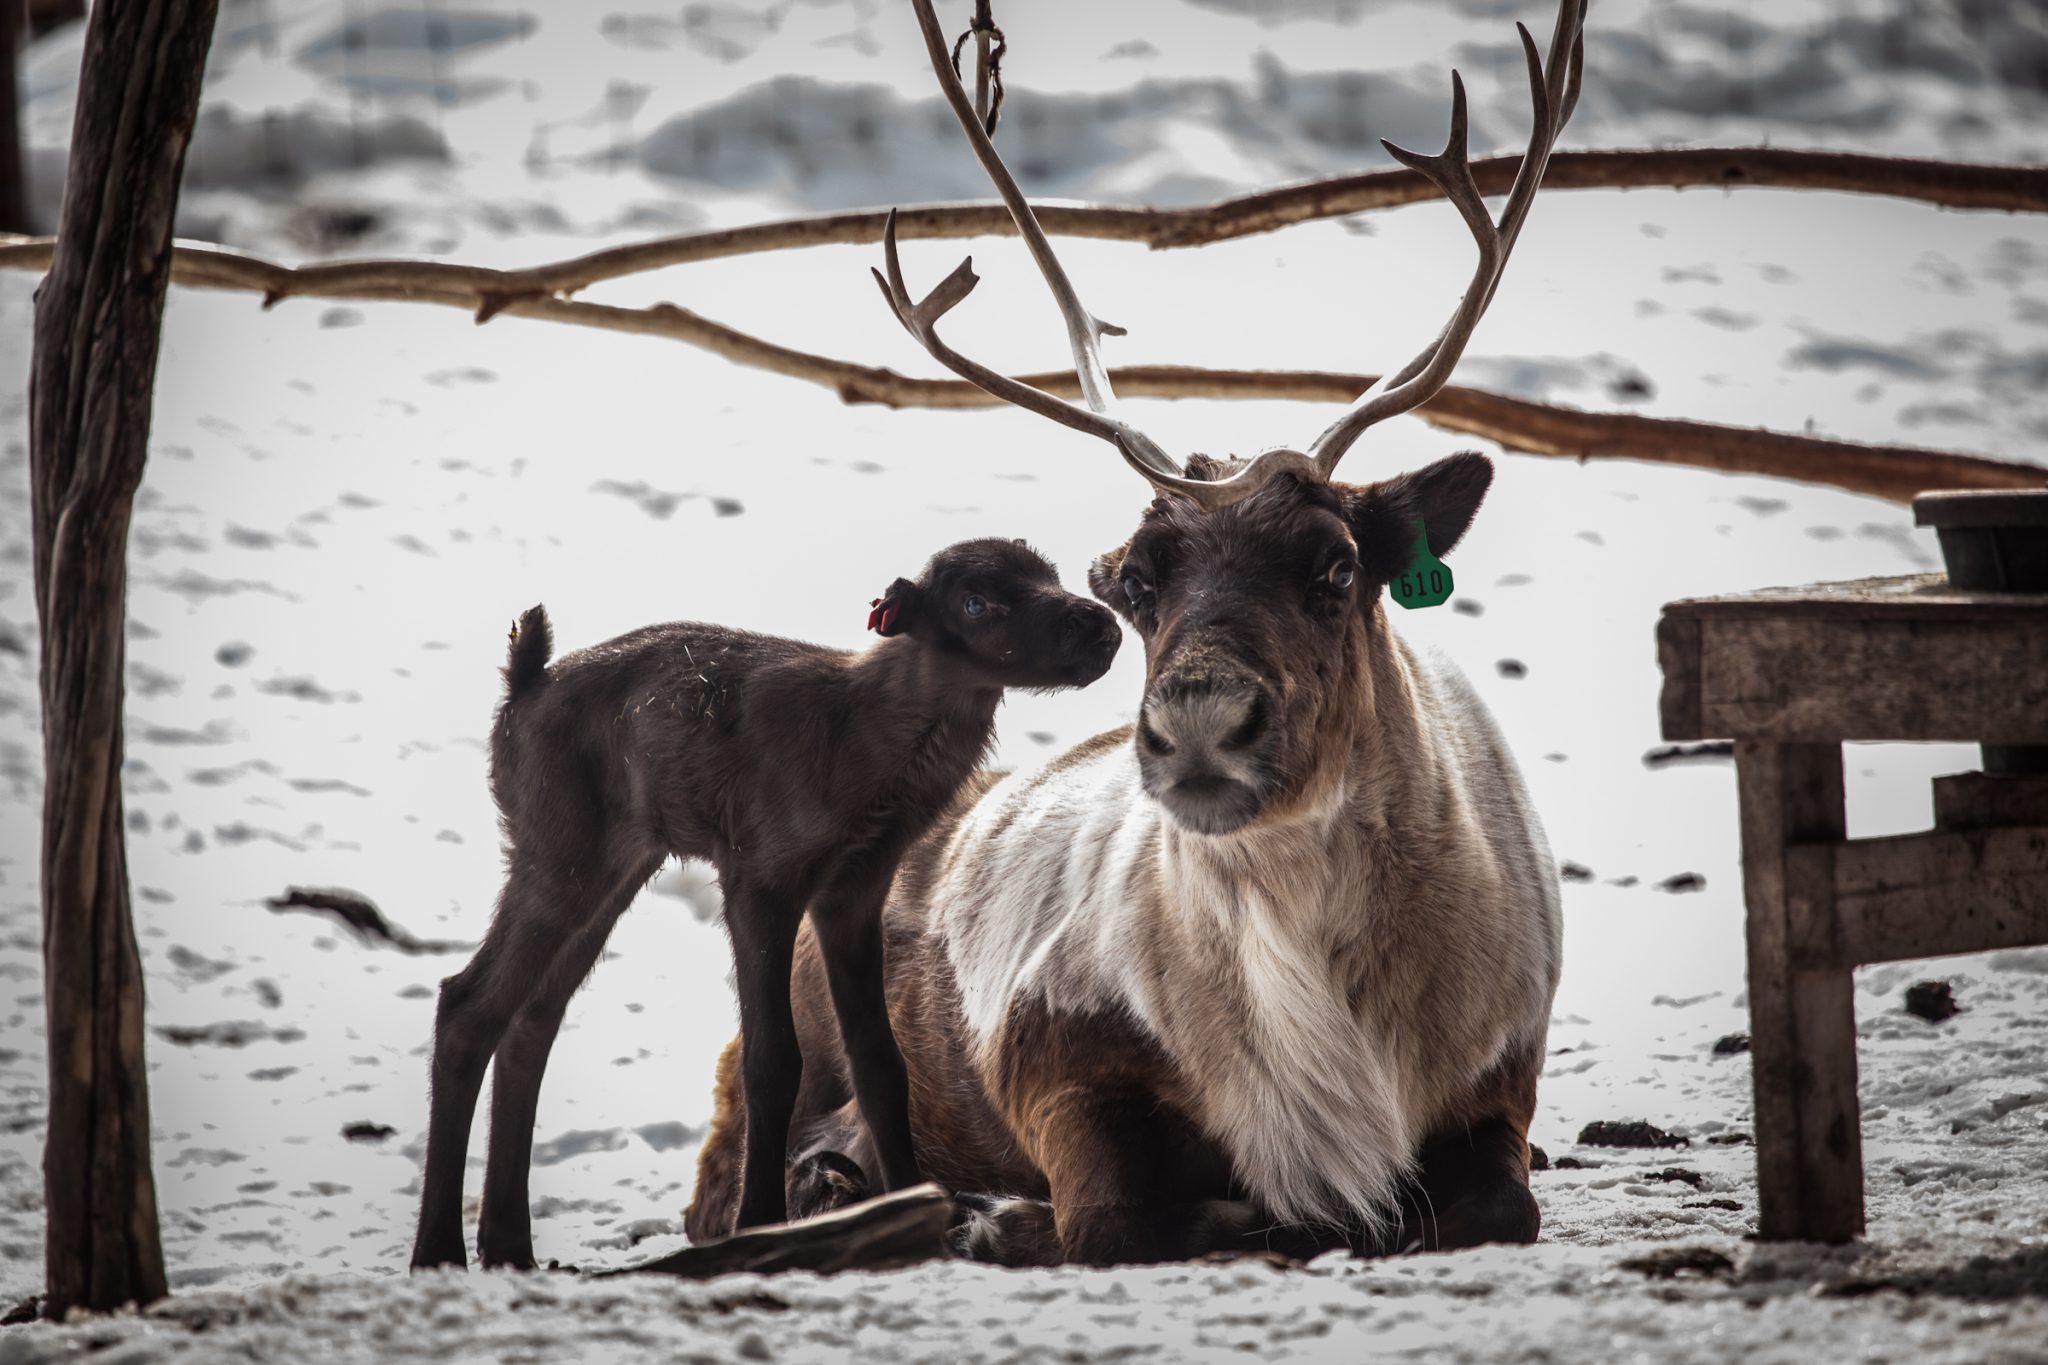 Midwife Ina May Gaskin points out that it's a good thing newborn reindeer have no horns (which would make it hard to nurse). Her point? Nature's designs work well, in animals AND in humans. Photo via University of Alaska Fairbanks.